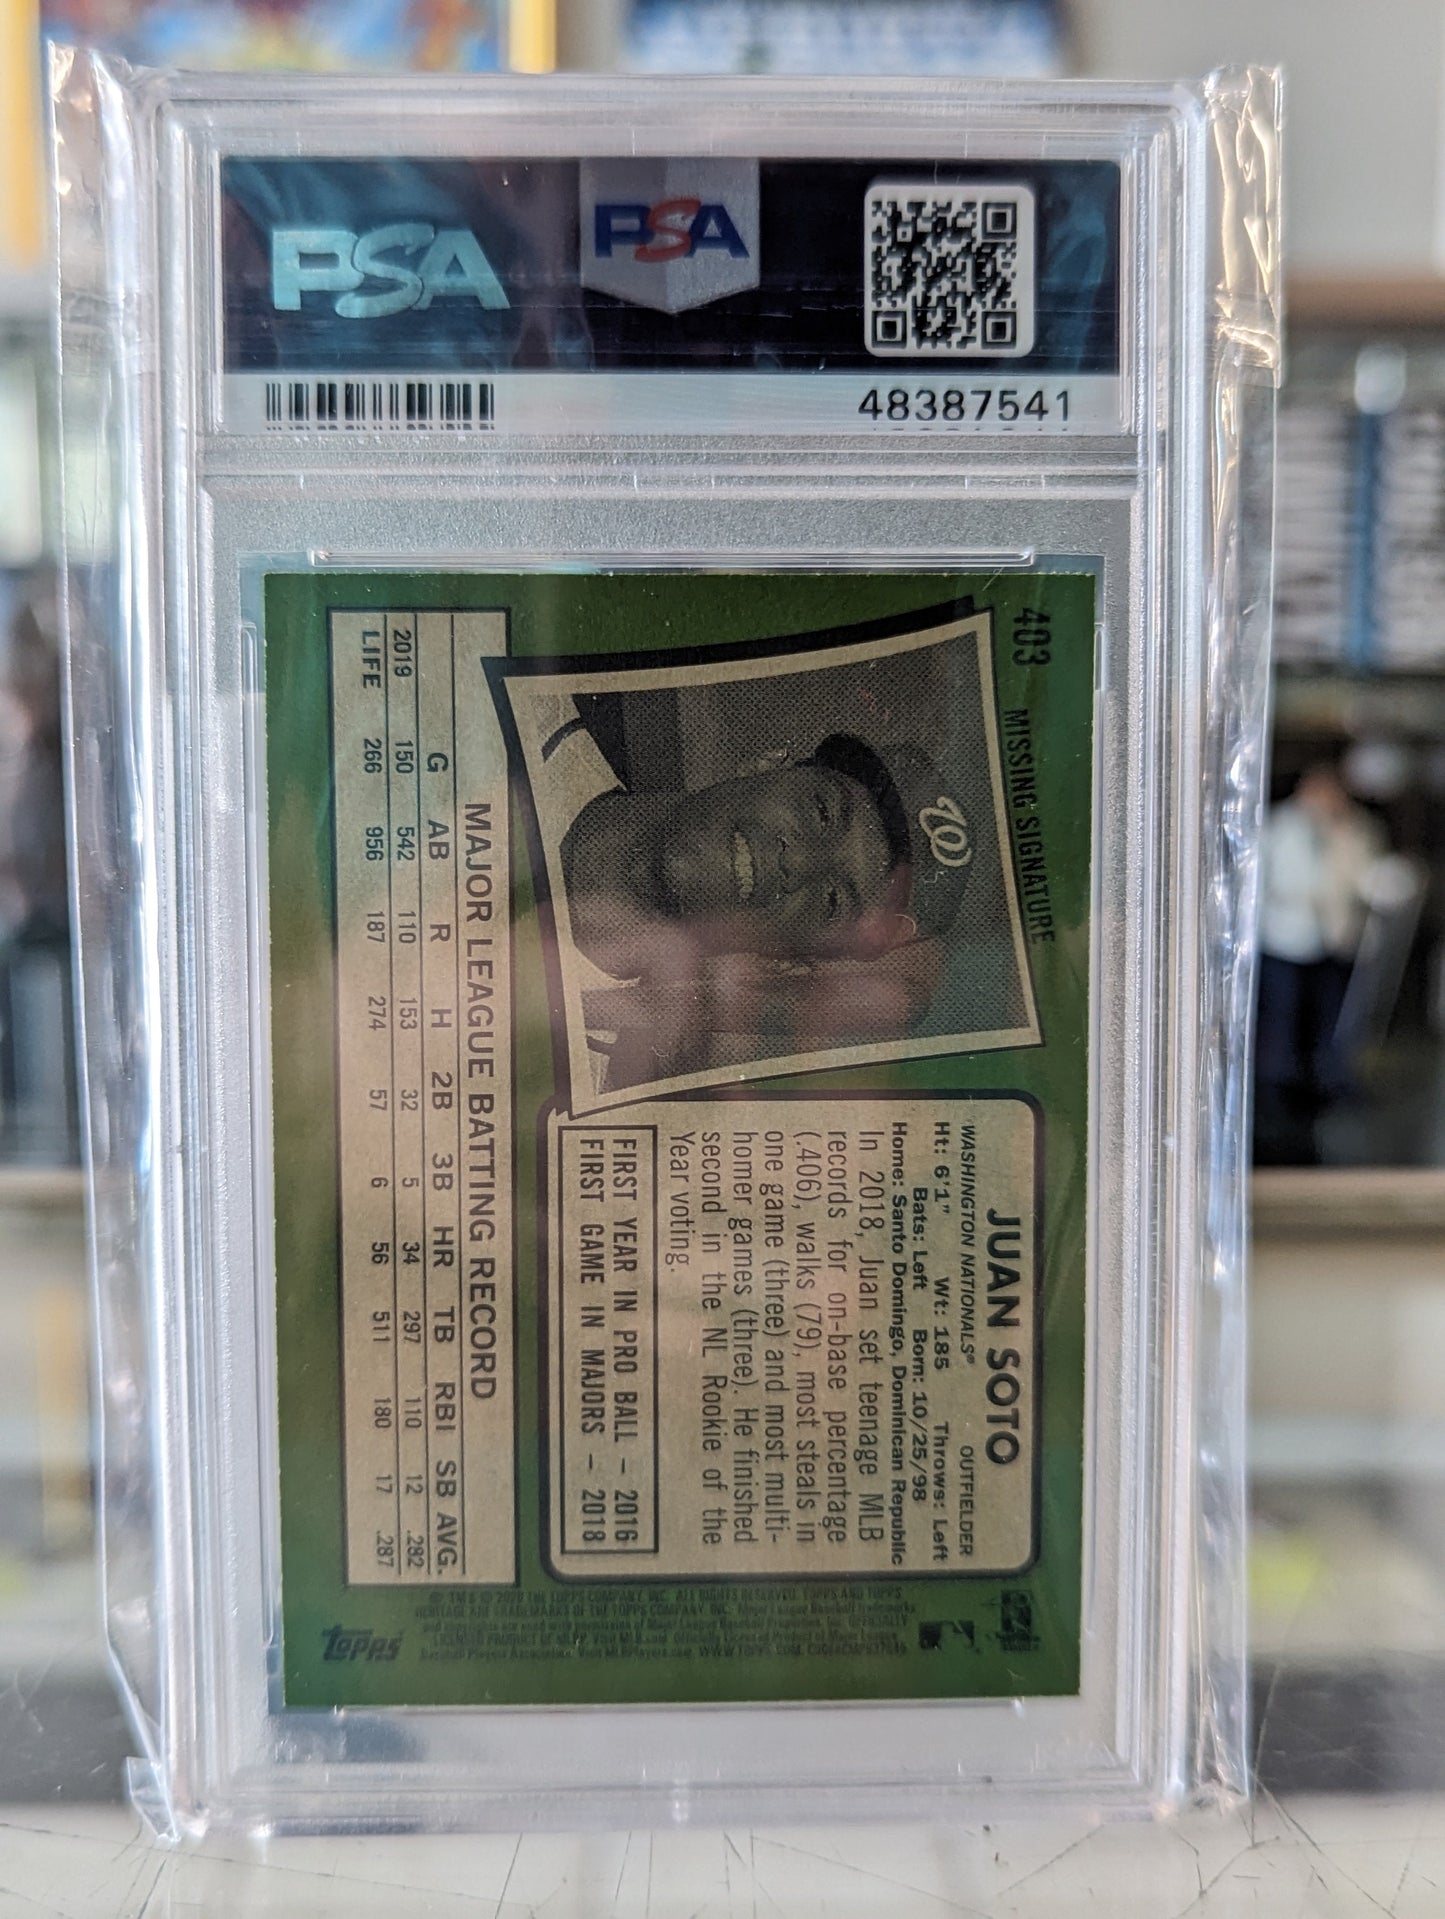 2020 Topps Heritage Juan Soto Missing Signature PSA 10 - Covert Comics and Collectibles